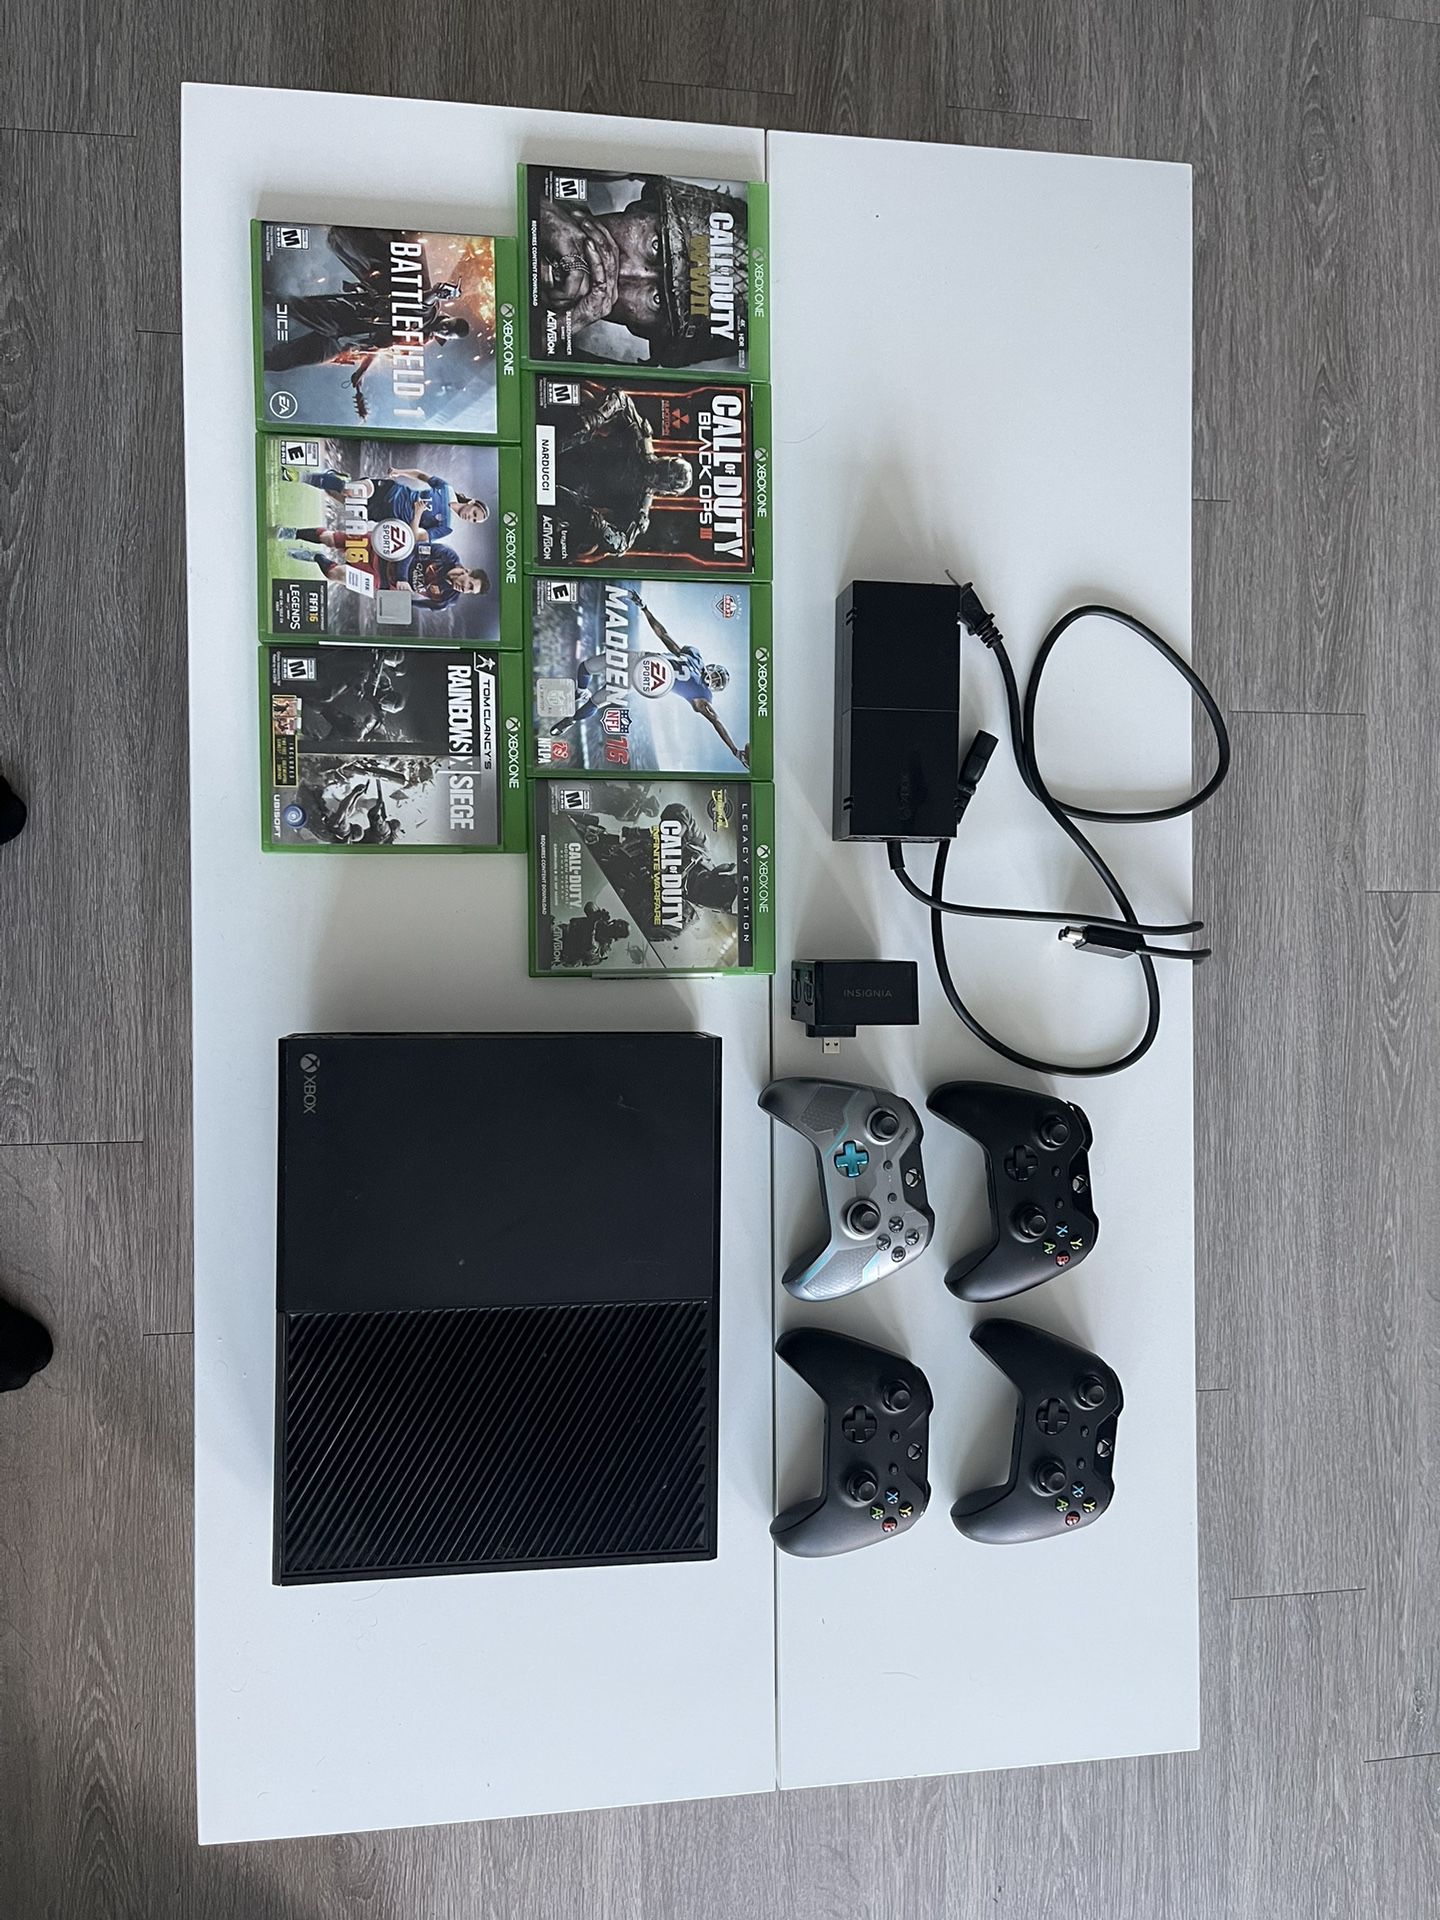 Xbox One With Games and Controllers 